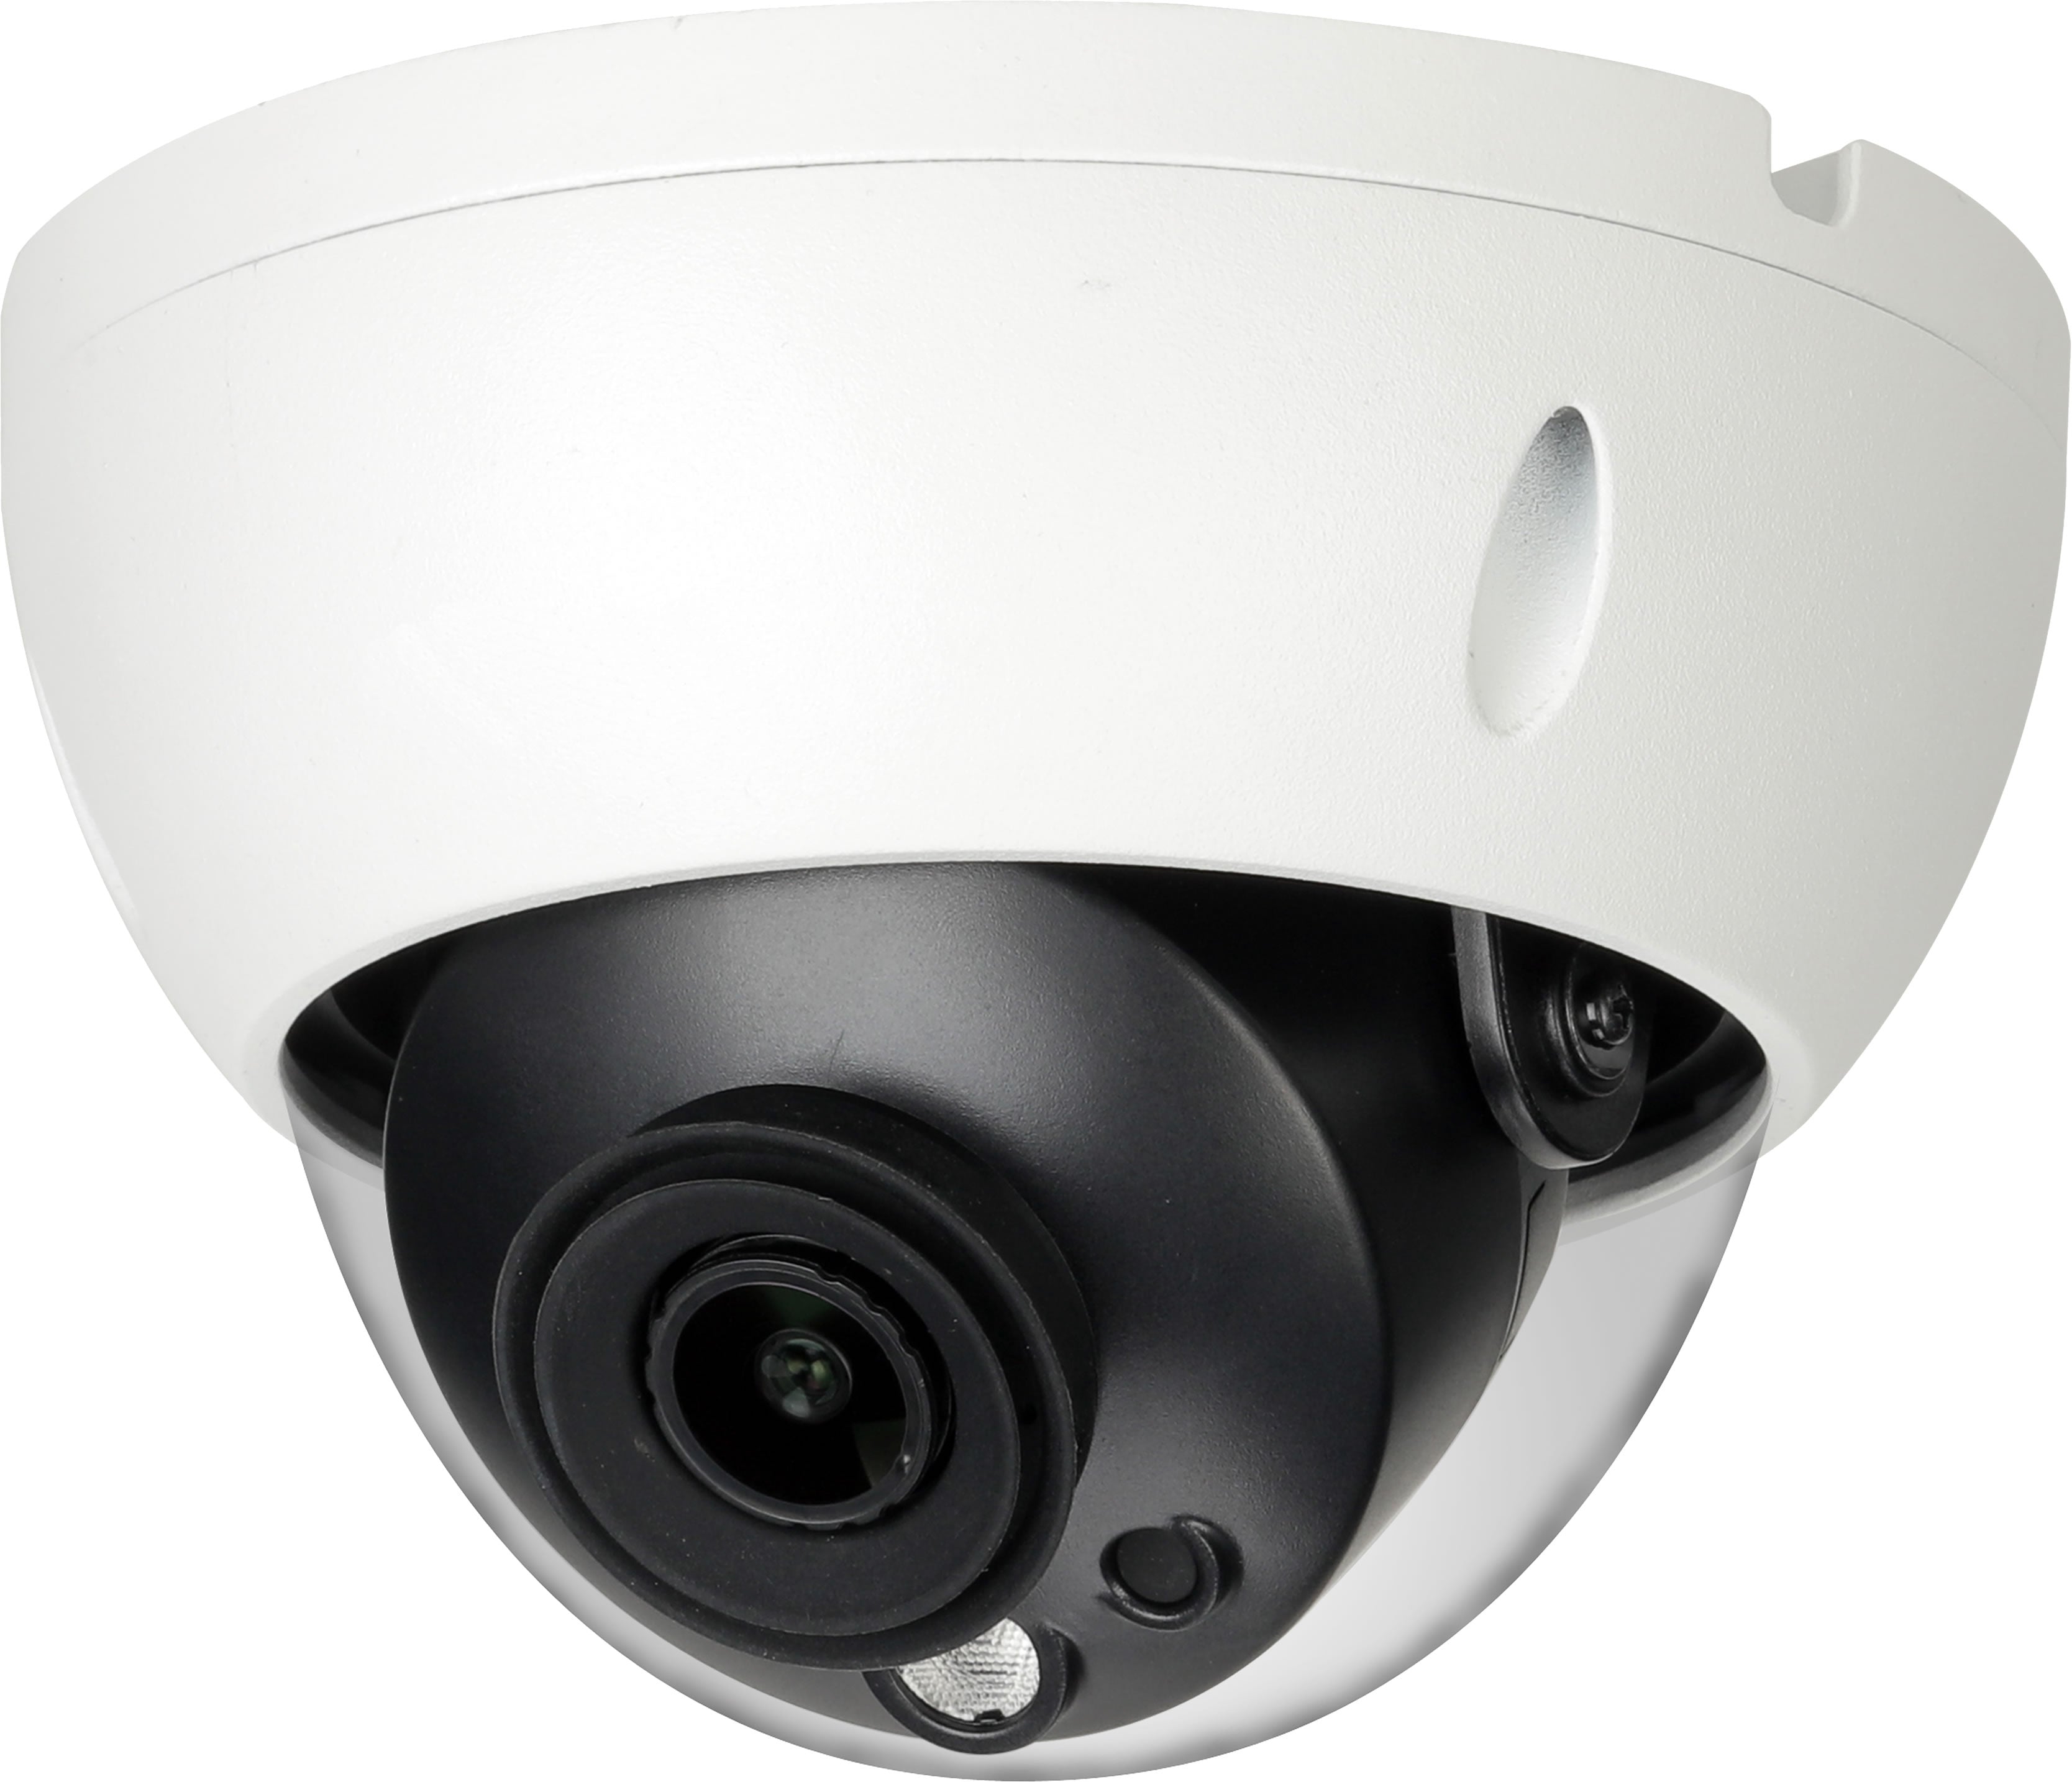 23-4DB18A31R 8MP WDR IR Dome Network Camera